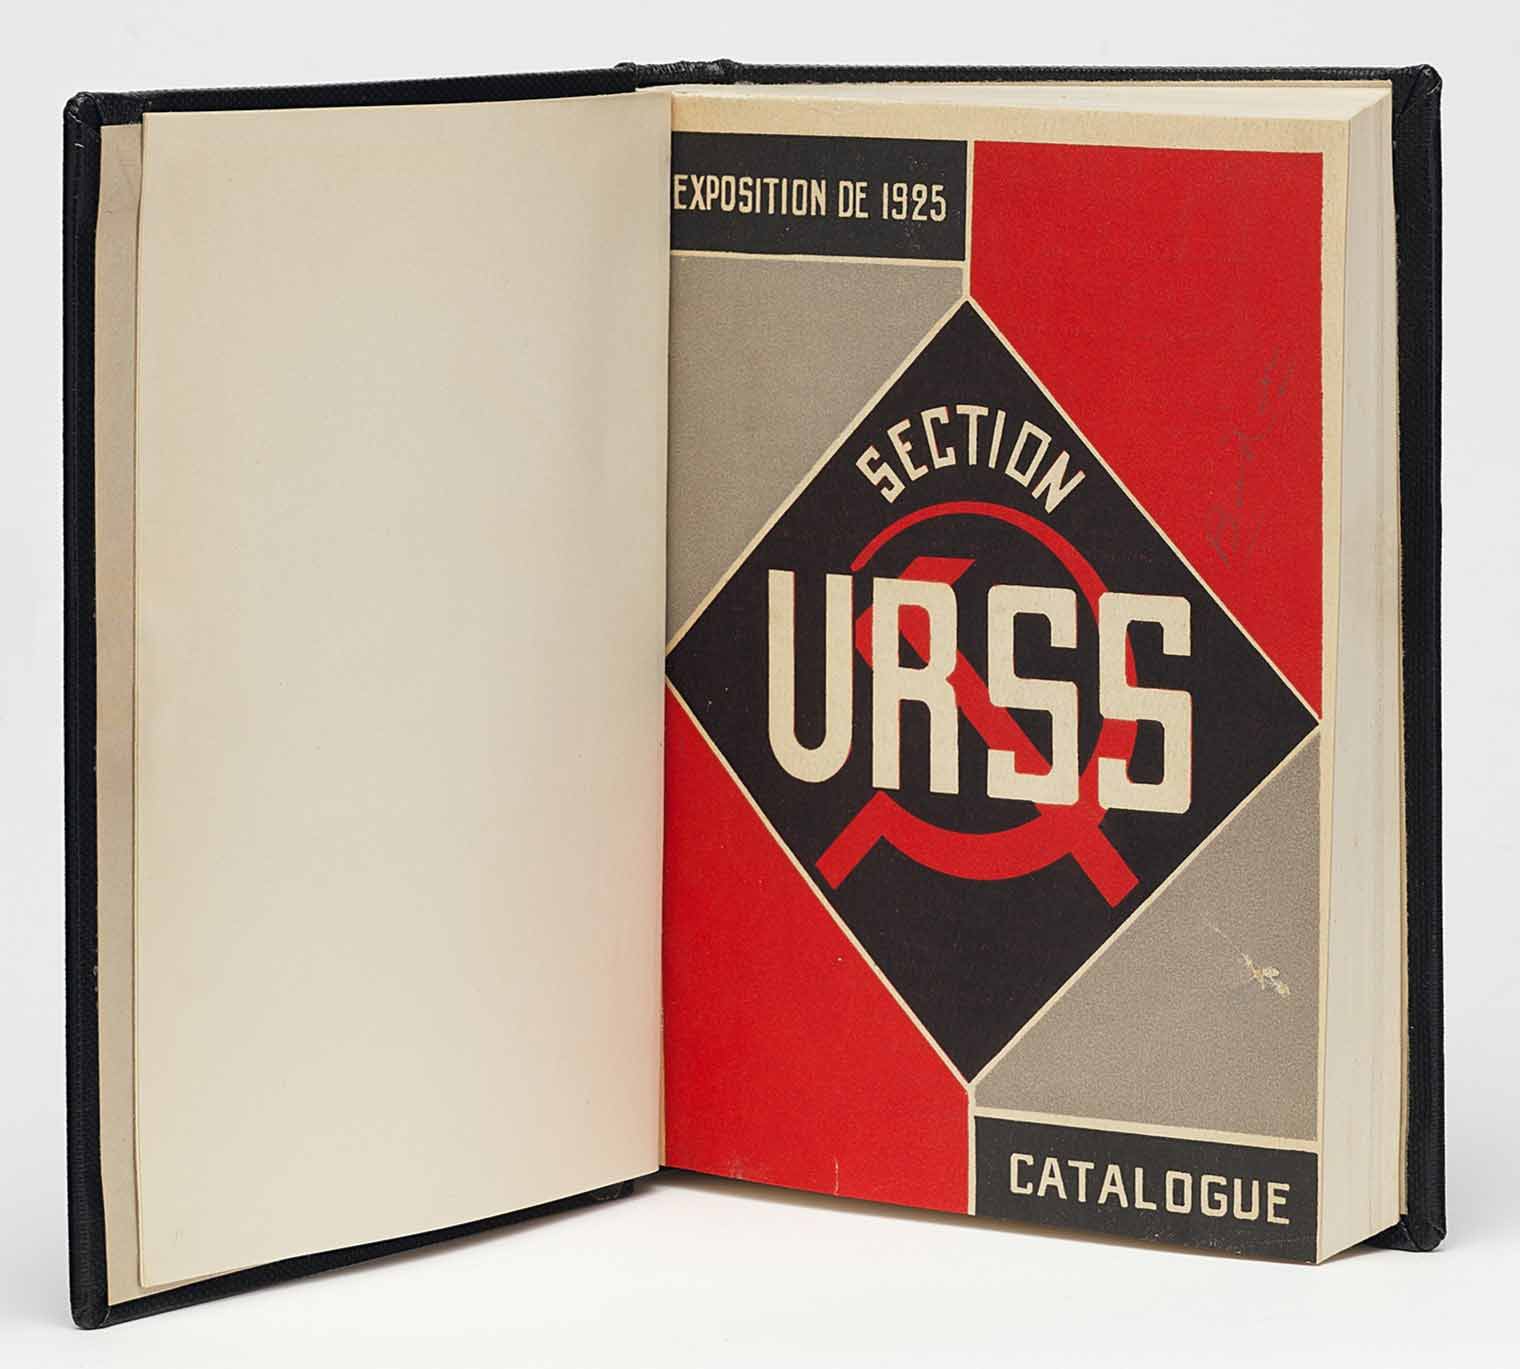 Book open to a cover page reading "Exposition de 1925, Section URSS, Catalogue" in front of a Soviet hammer and sickle